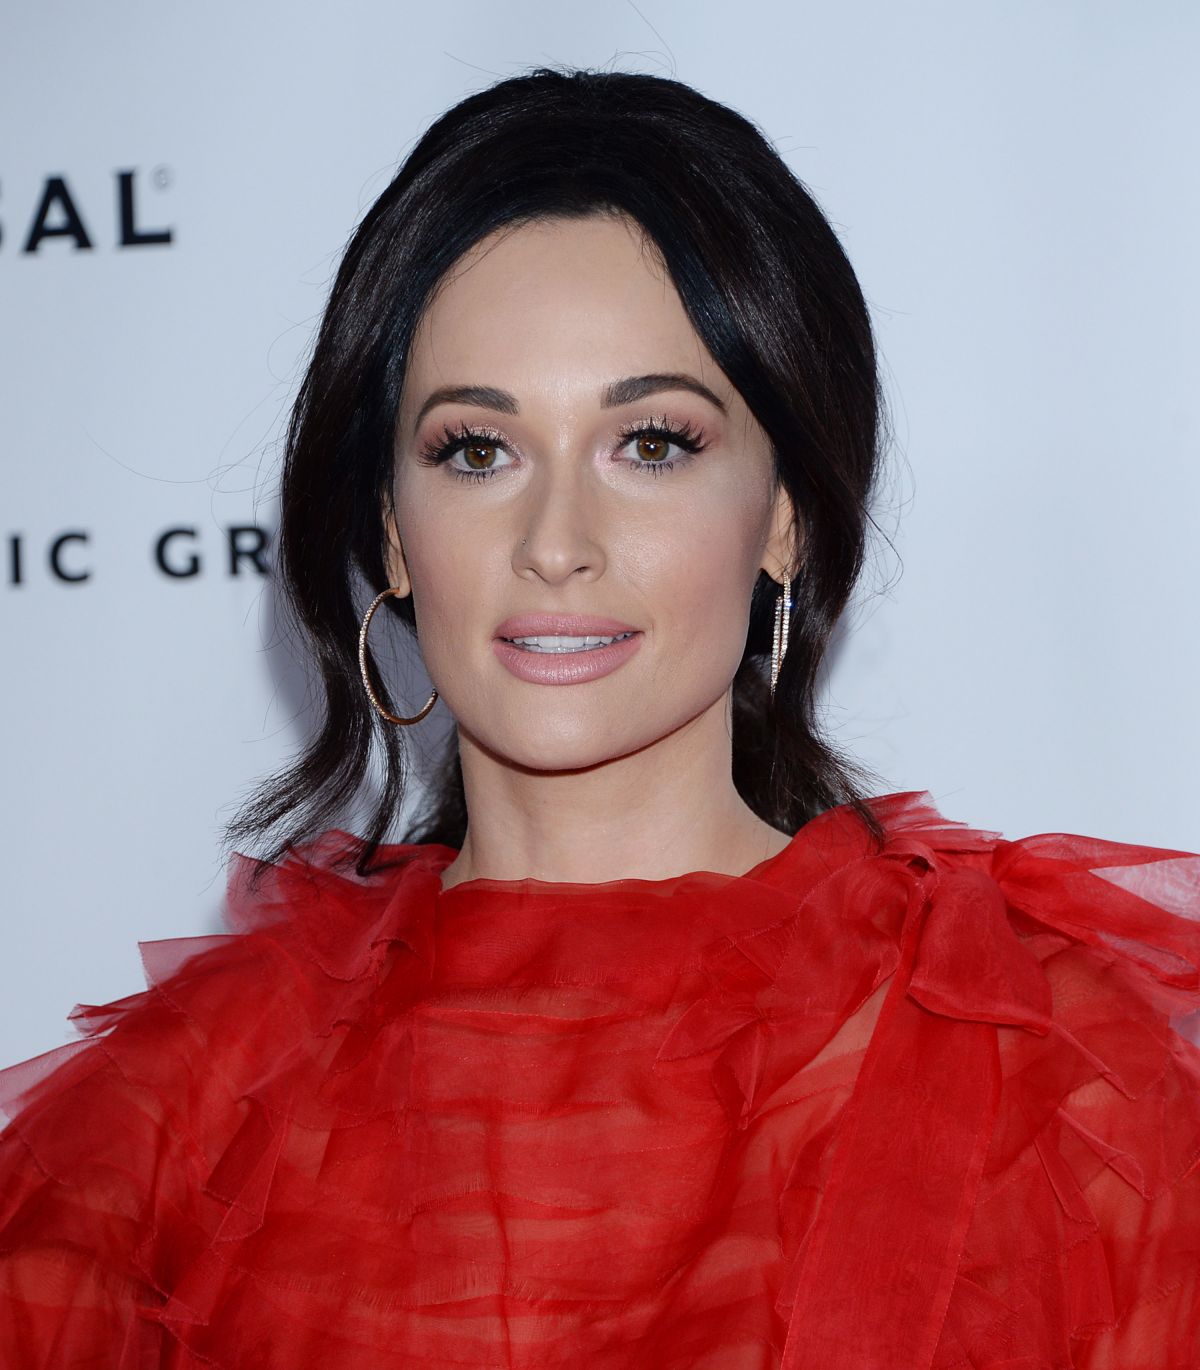 Kacey Musgraves At Universal Music Group Grammy After Party Los Angeles.